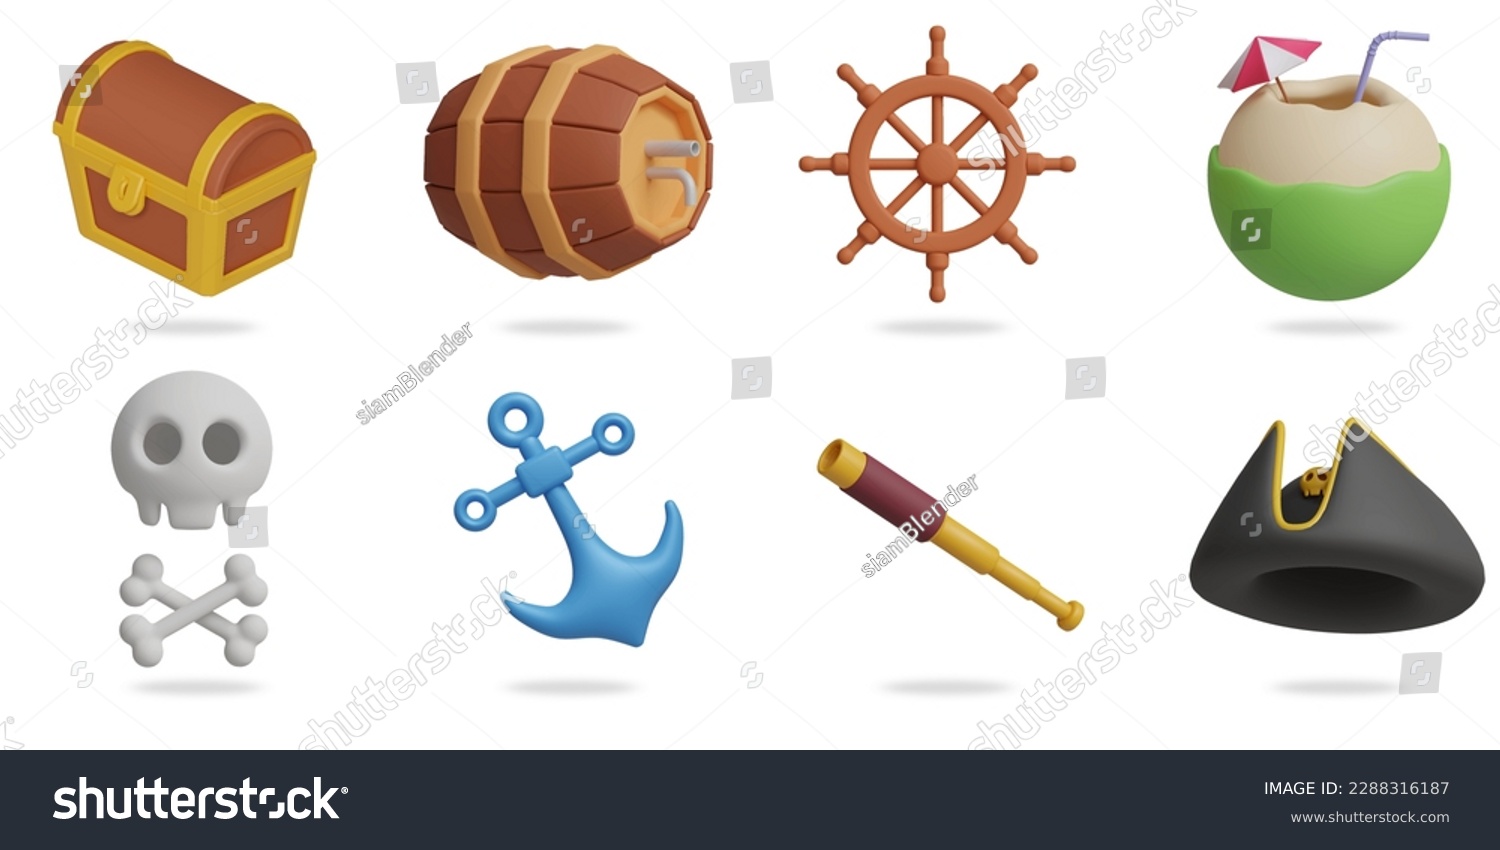 SVG of pirate 3D vector icon set.
treasure chest,wooden barrel,boat steering wheel,coconut,skull,anchor,telescope spyglass,pirate hat svg